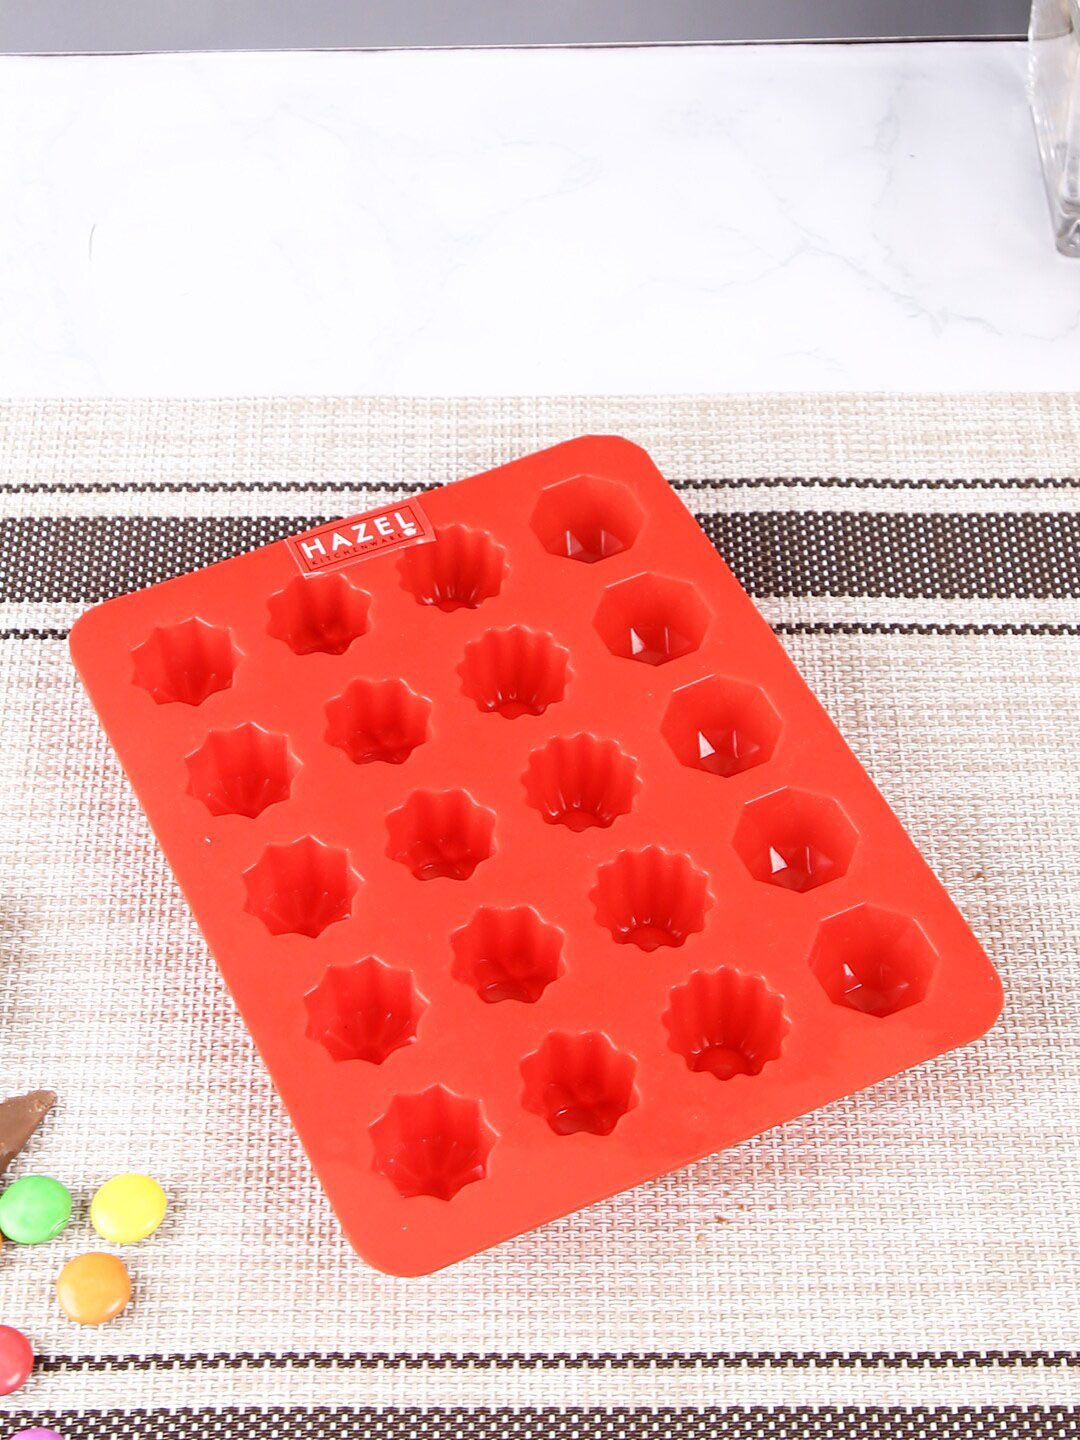 HAZEL Red Solid Silicone Flower & Round Chocolate 3D DIY Homemade Candy Baking Mould Price in India